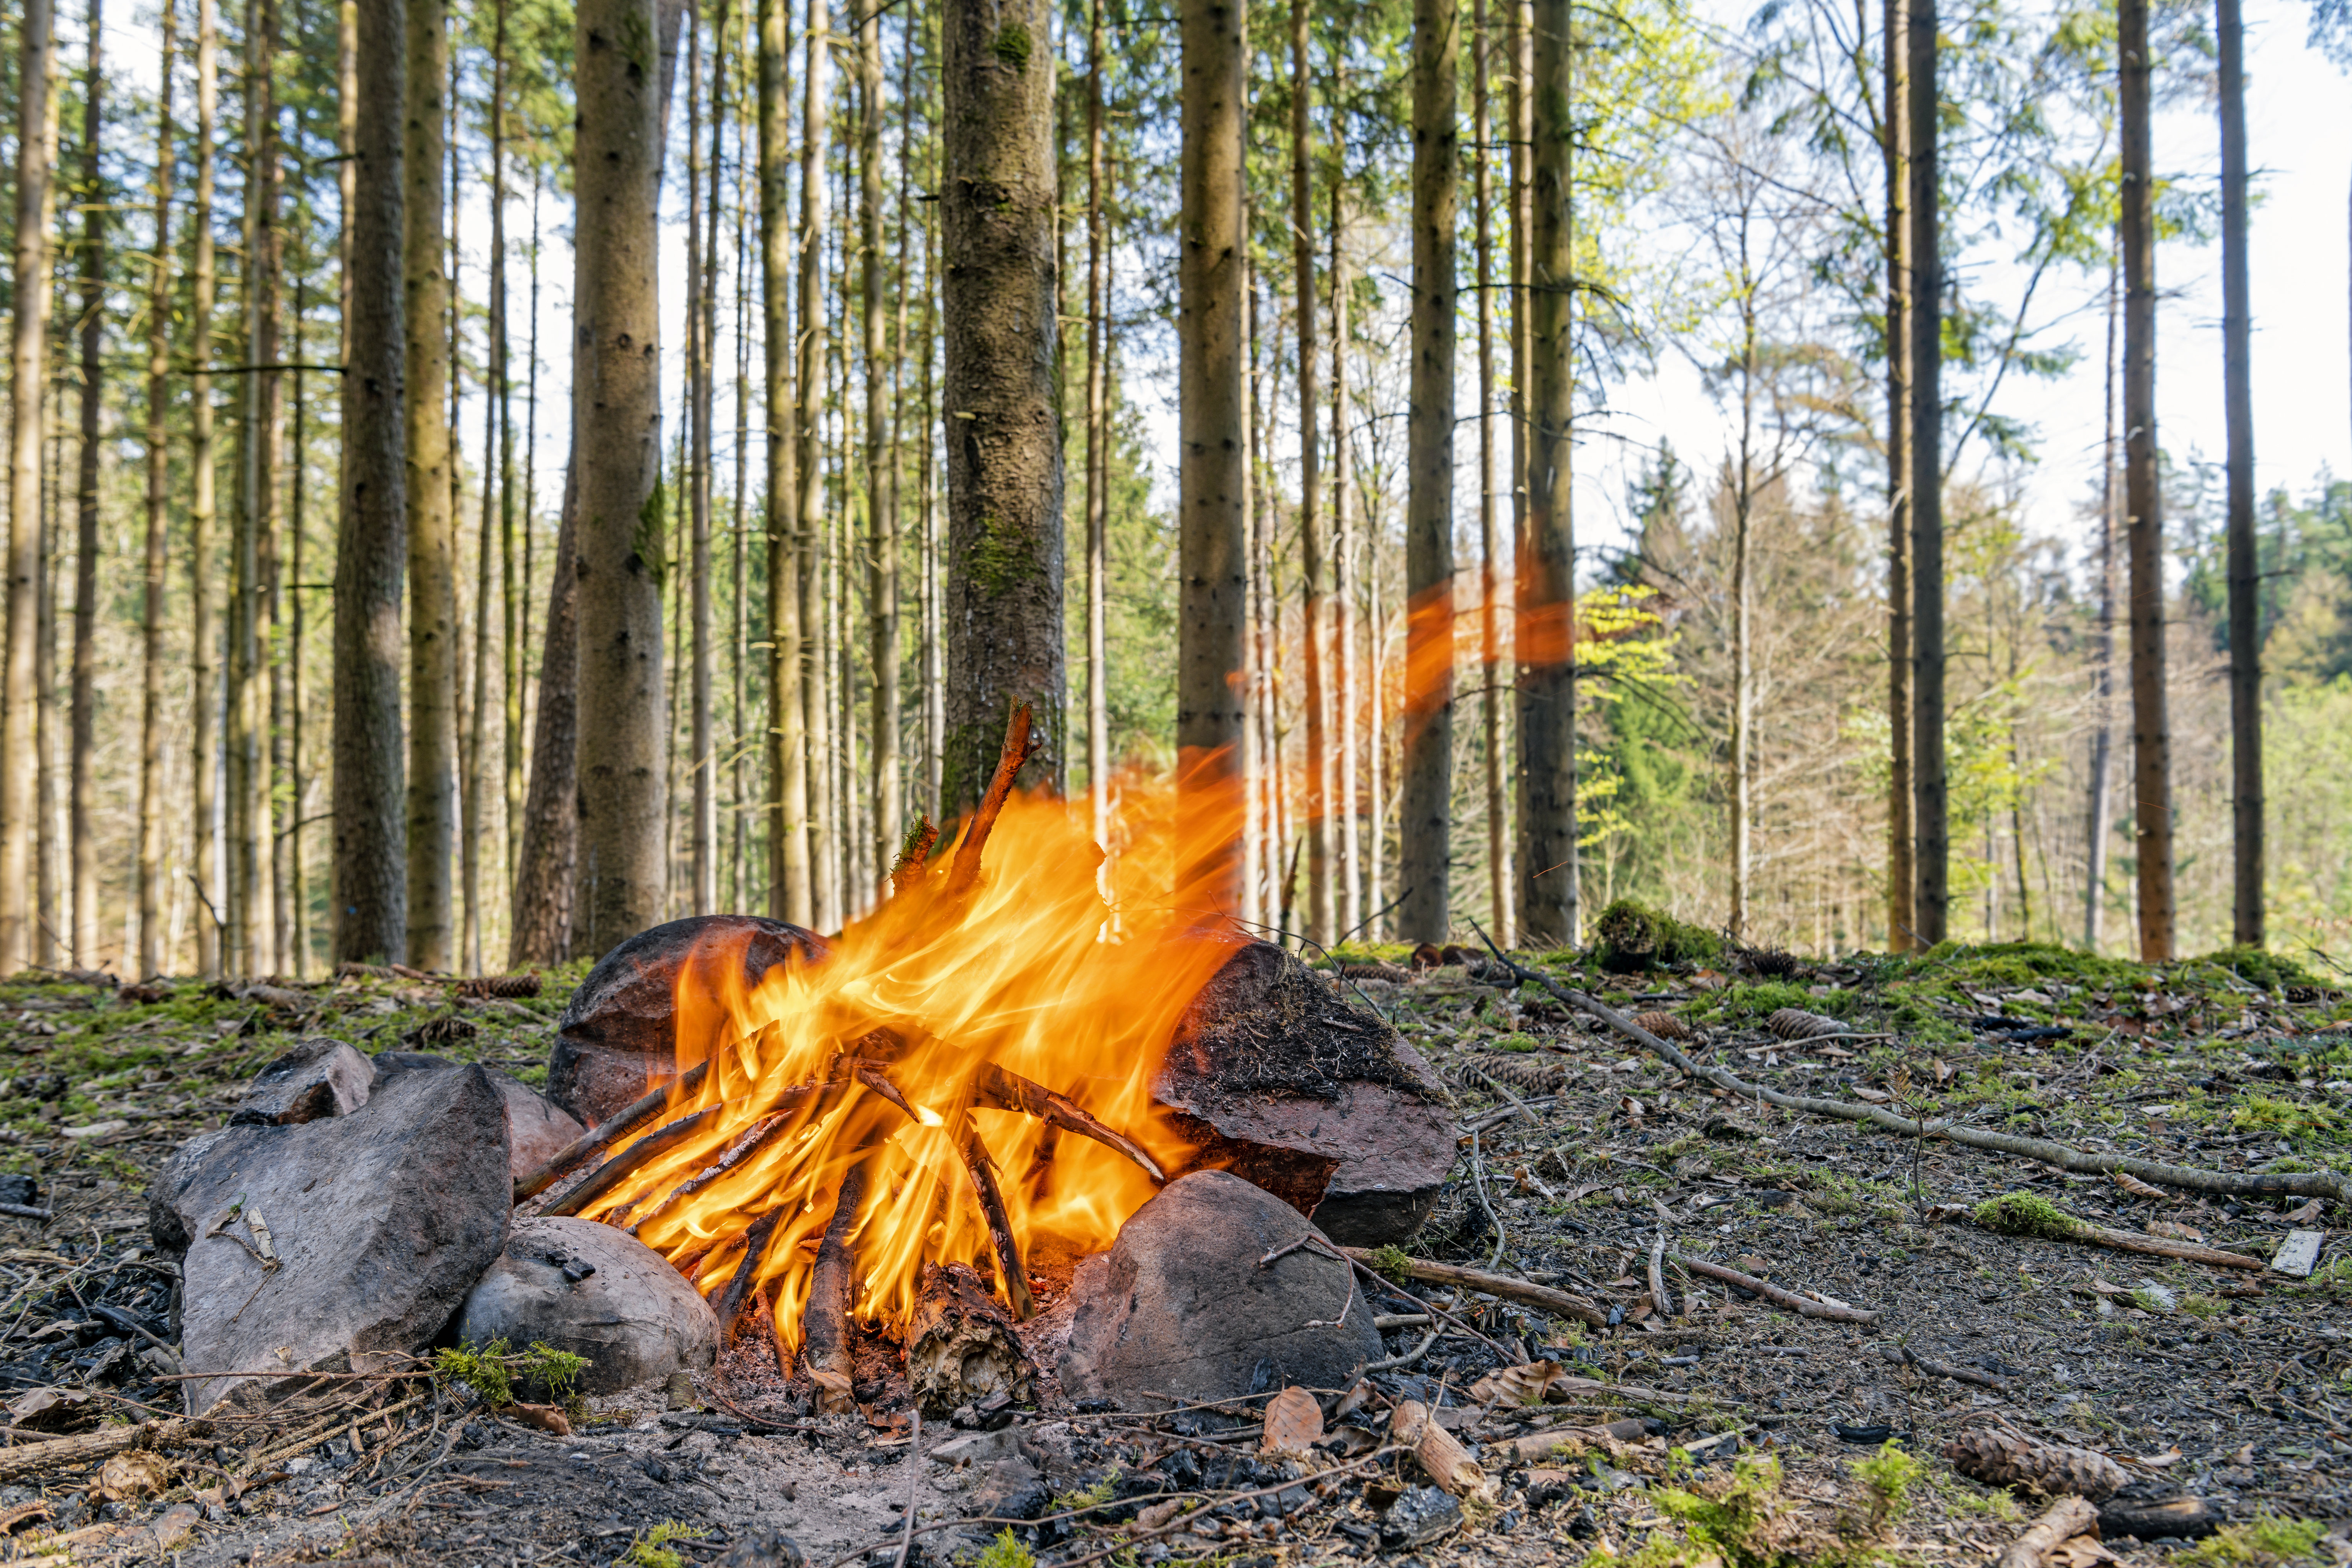 bonfire, trees, flame, miscellanea, miscellaneous, forest, firewood, camping, campsite